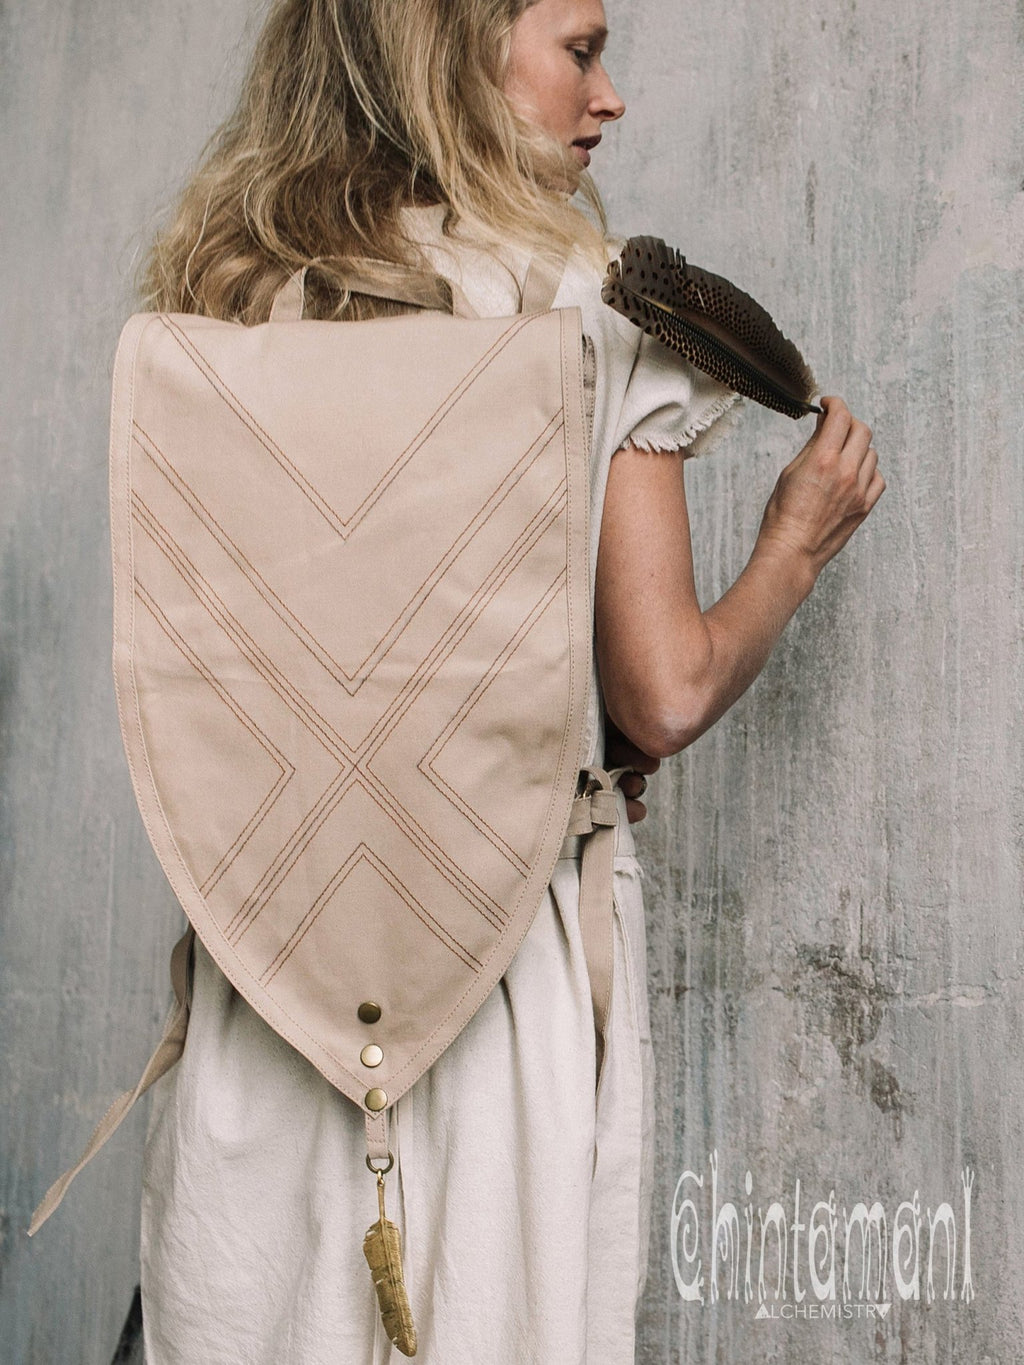 Shield Cotton Canvas Backpack / Triangle Vegan Laptop Backpack / Beige - ChintamaniAlchemi